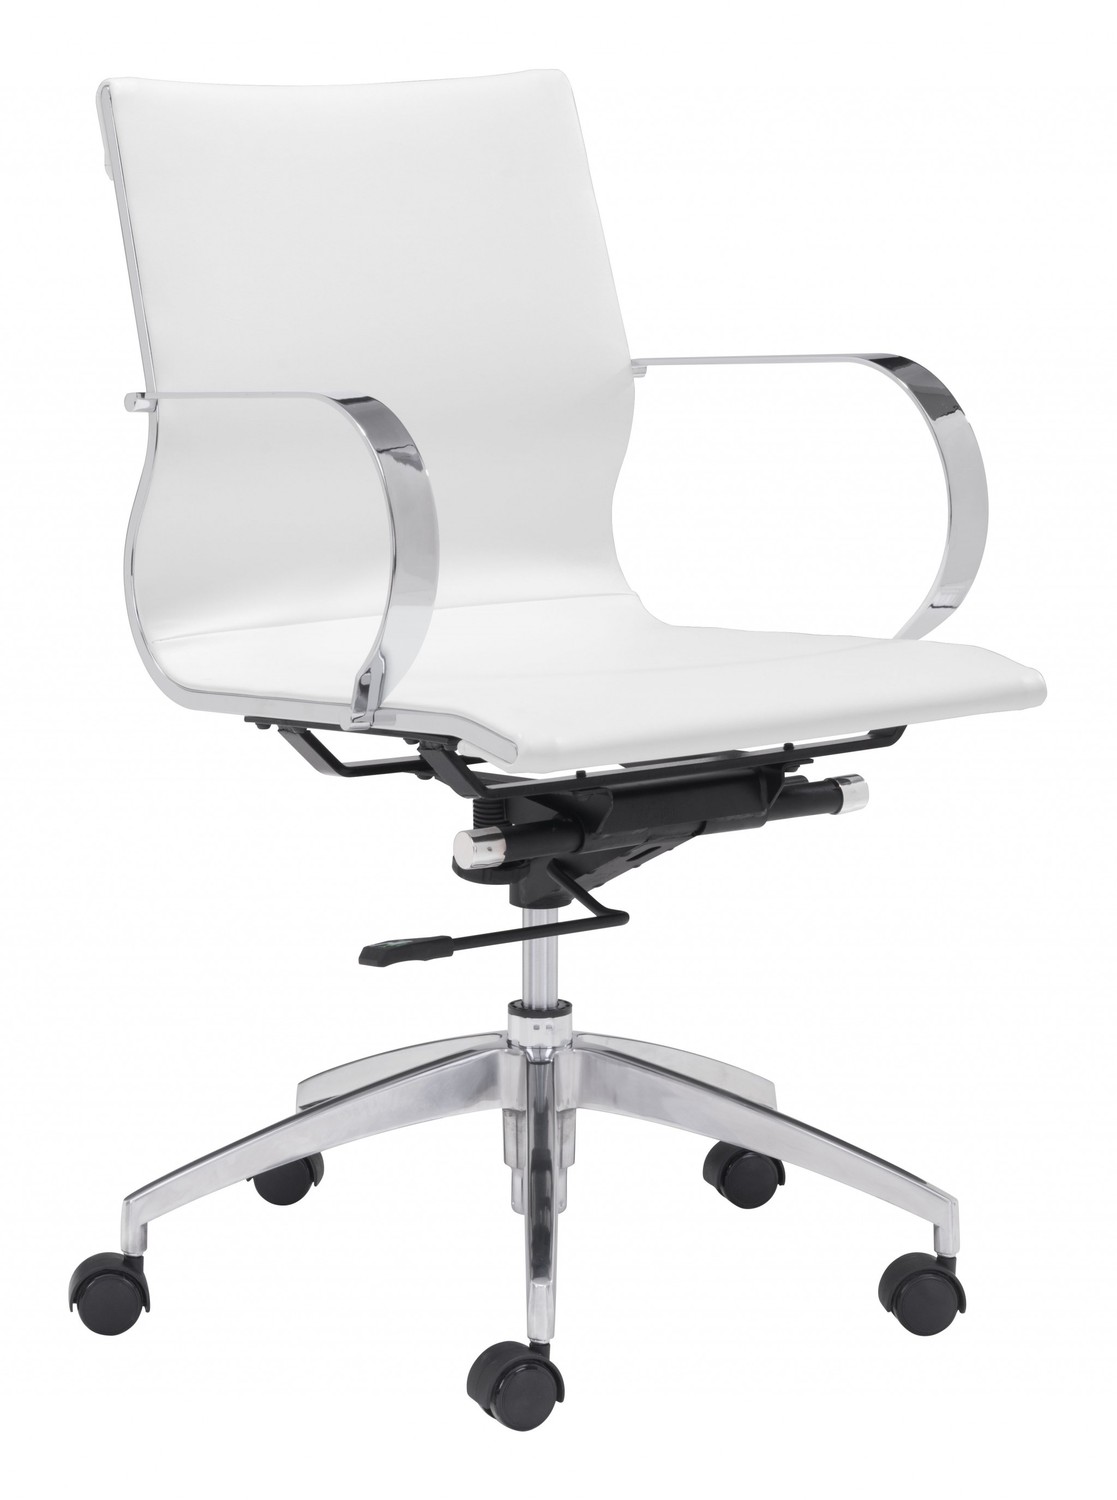 White Ergonomic Conference Room Low Back Rolling Office Chair